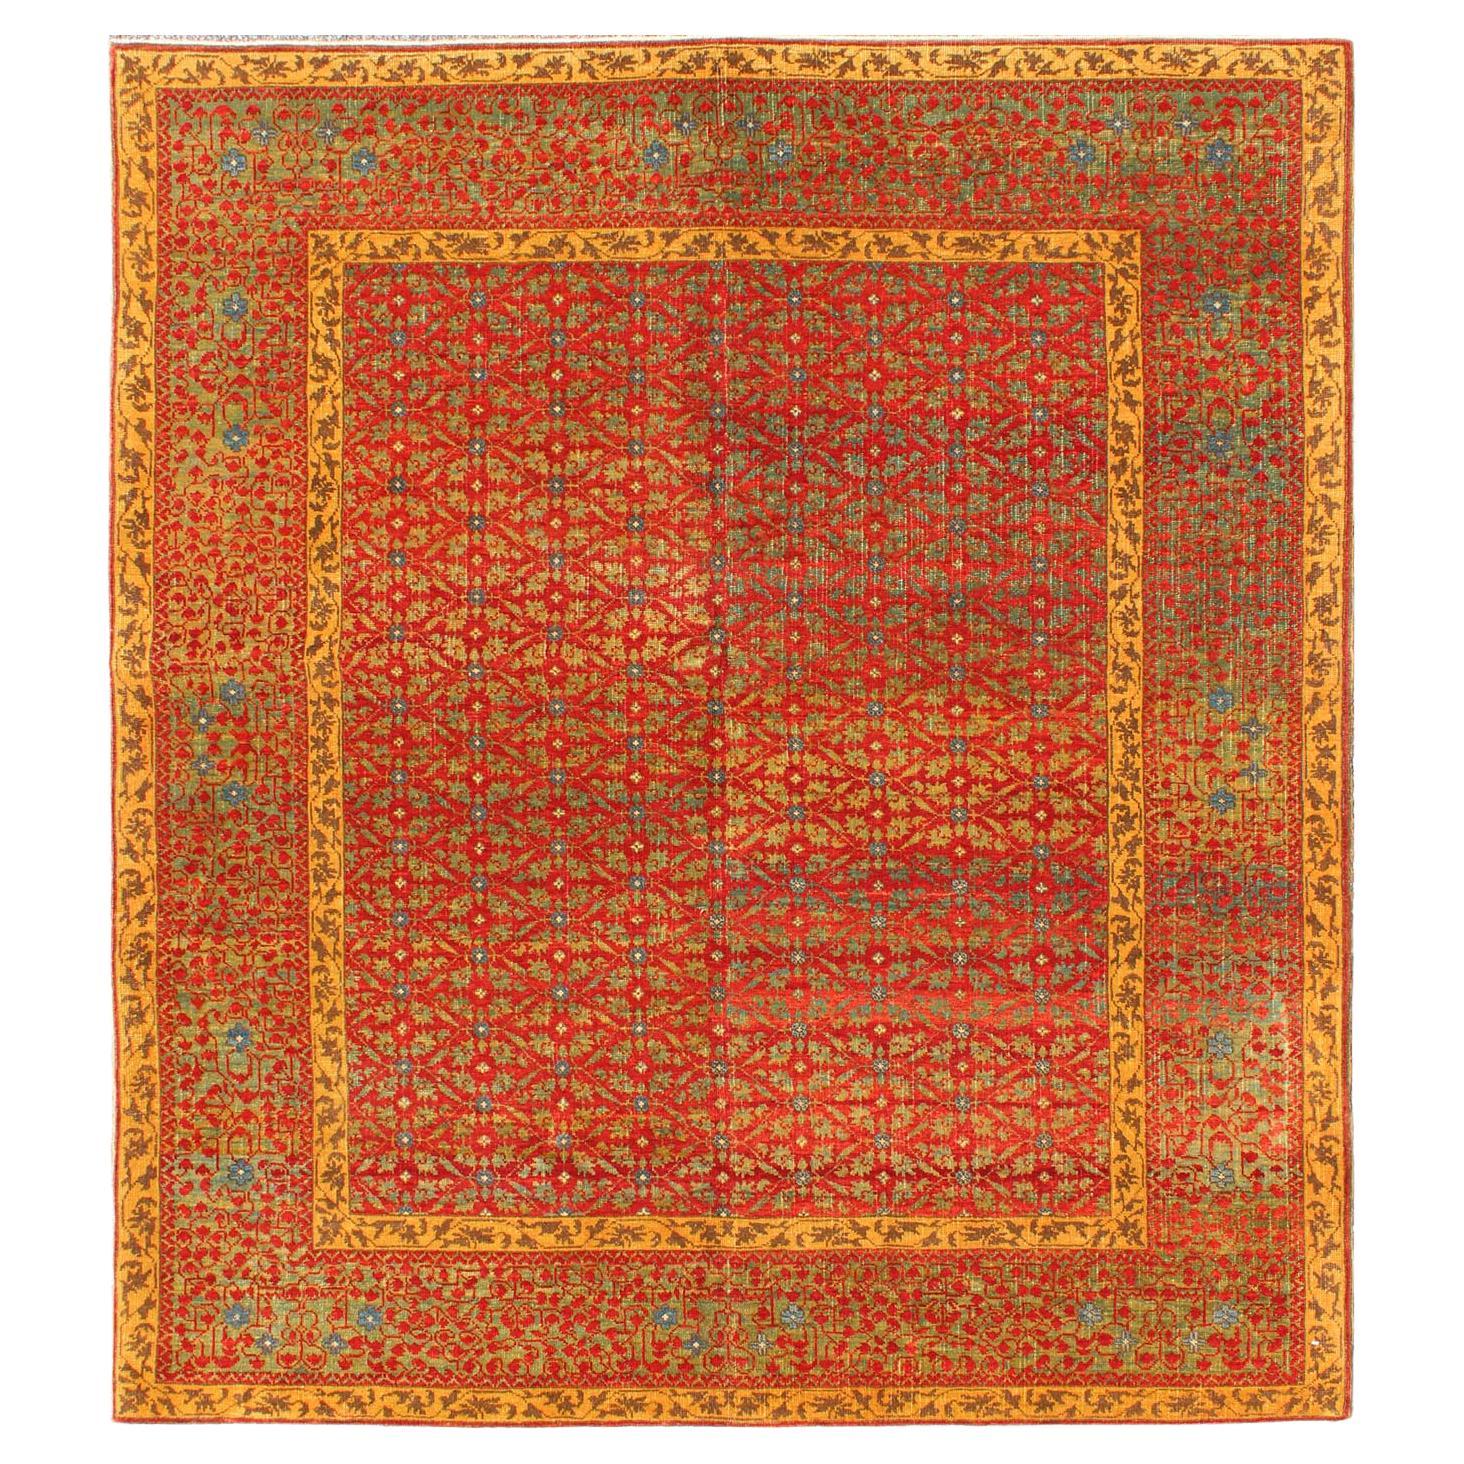 Square Sized Vintage Ottoman Rug with Repeating All-Over Design